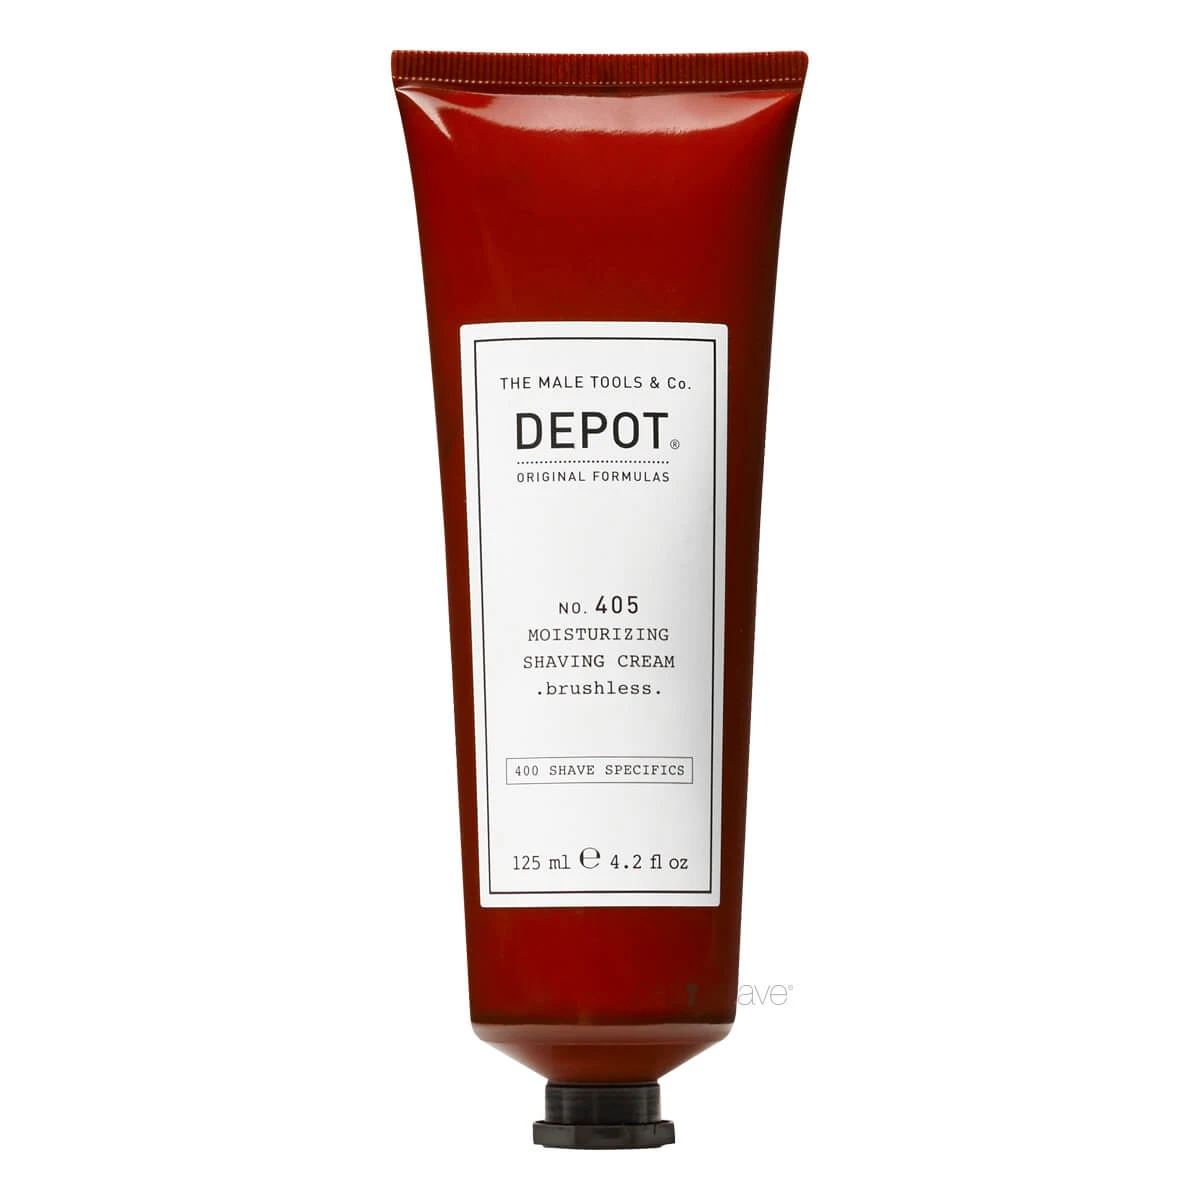 Shaving Creams | Find your shaving cream in DK's best selection